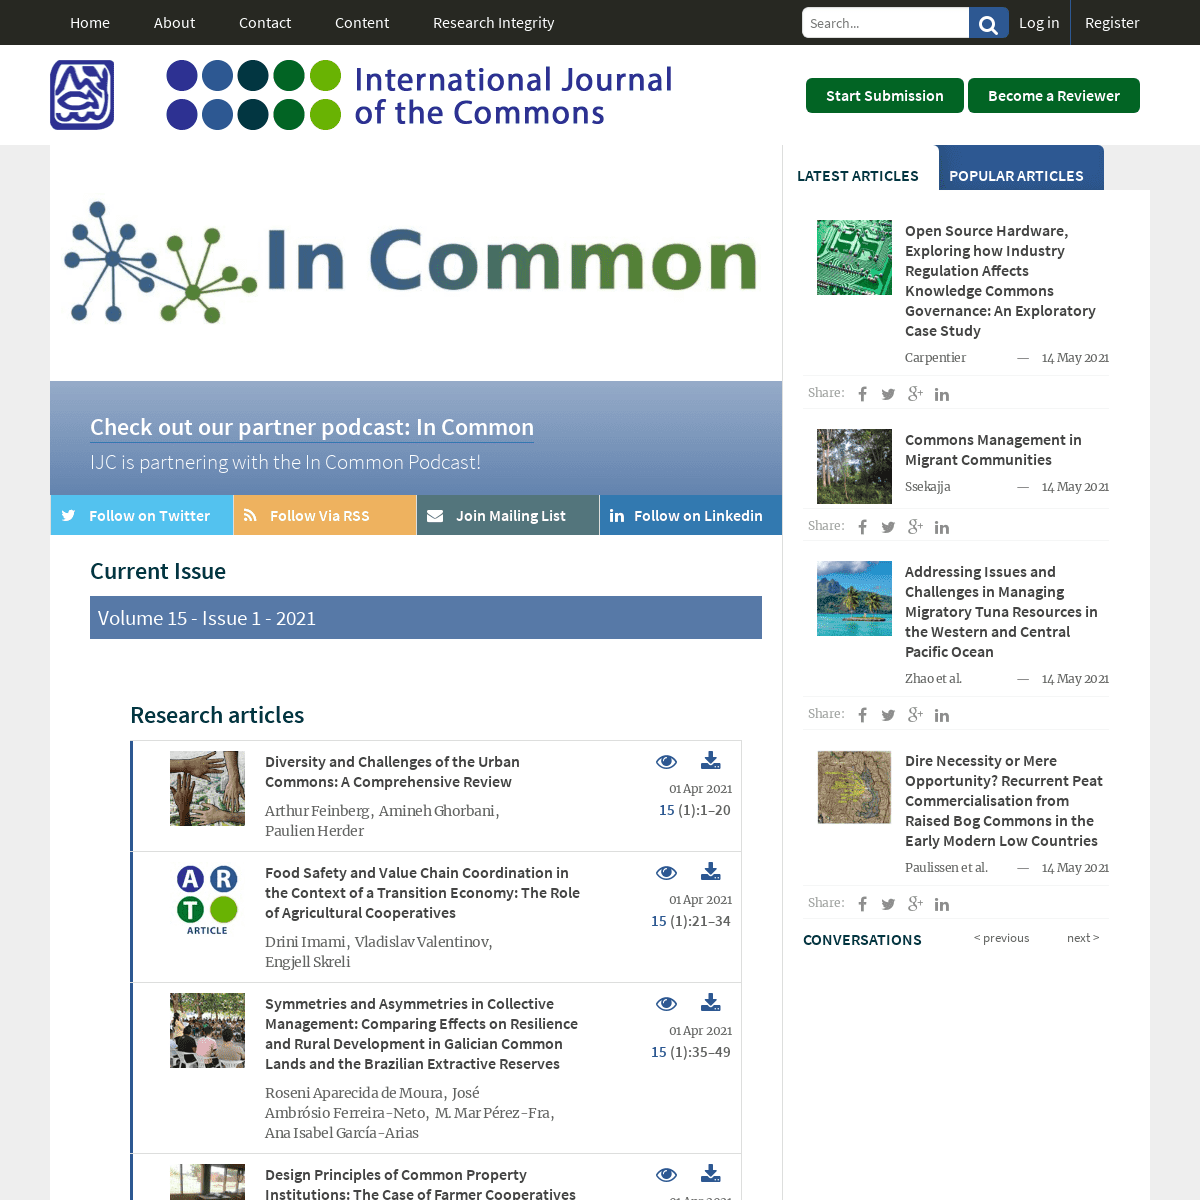 A complete backup of https://thecommonsjournal.org